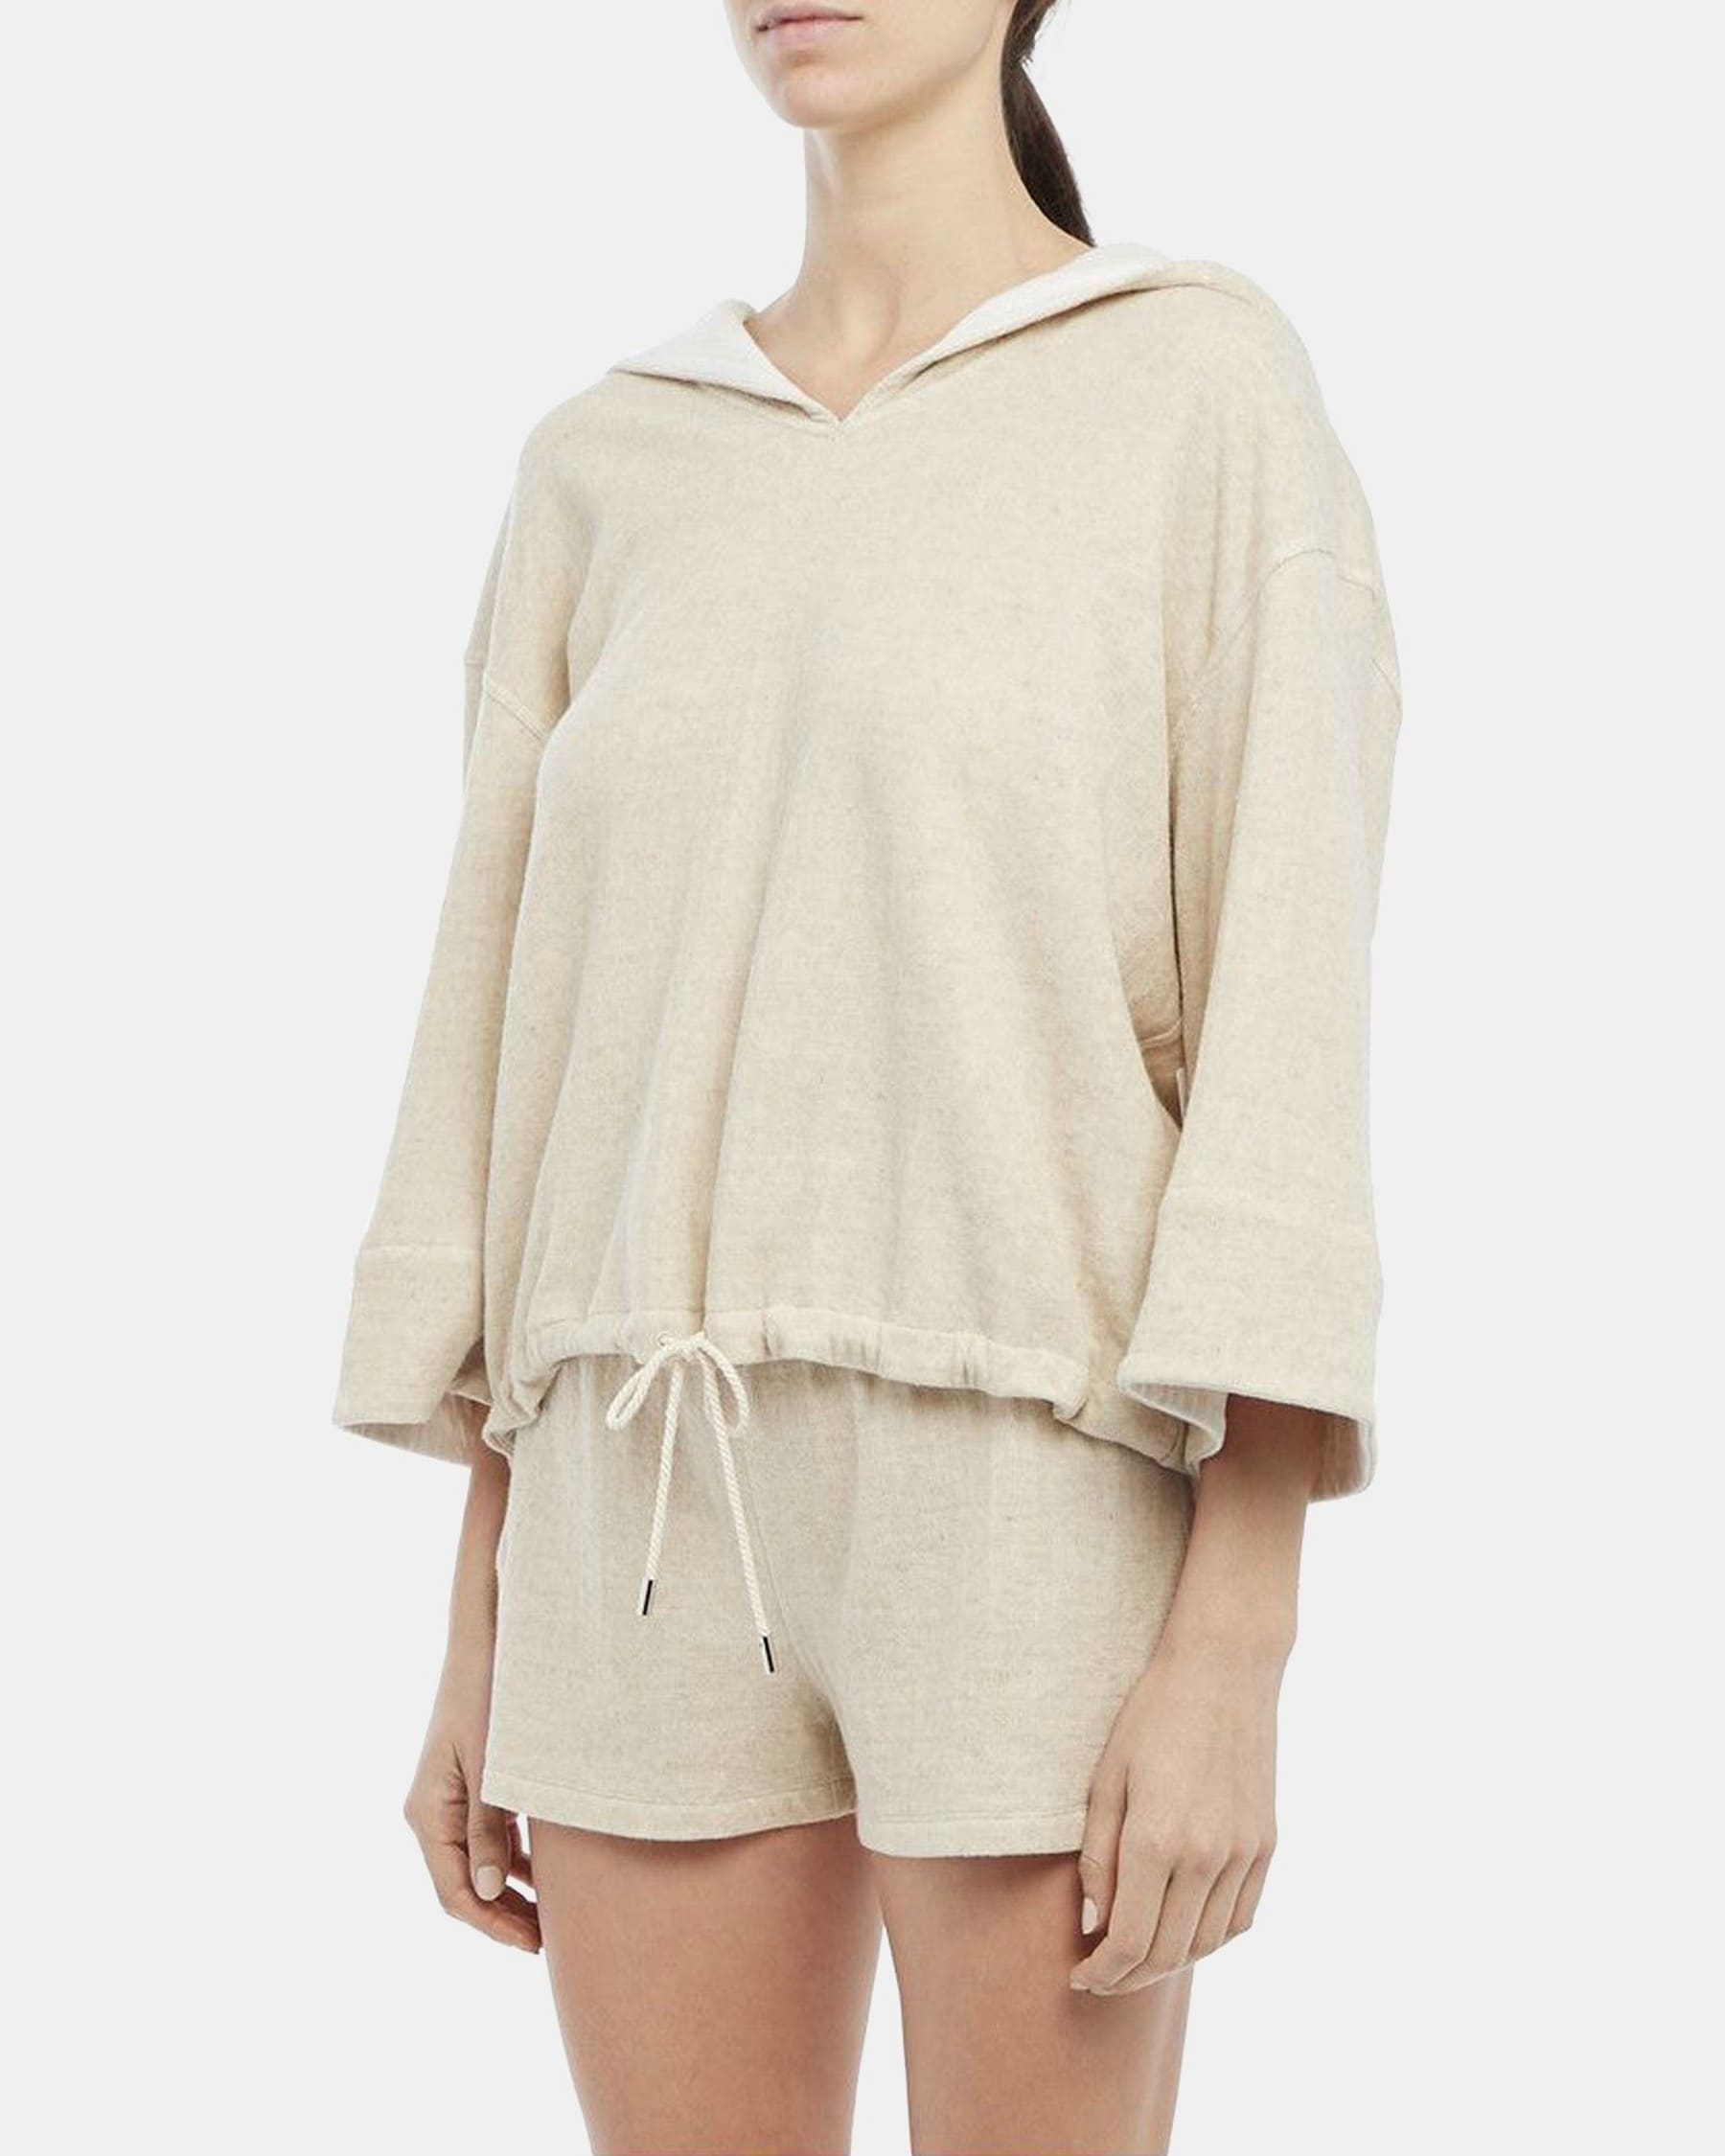 Hooded Short-Sleeve Tee in Cotton-Linen Knit